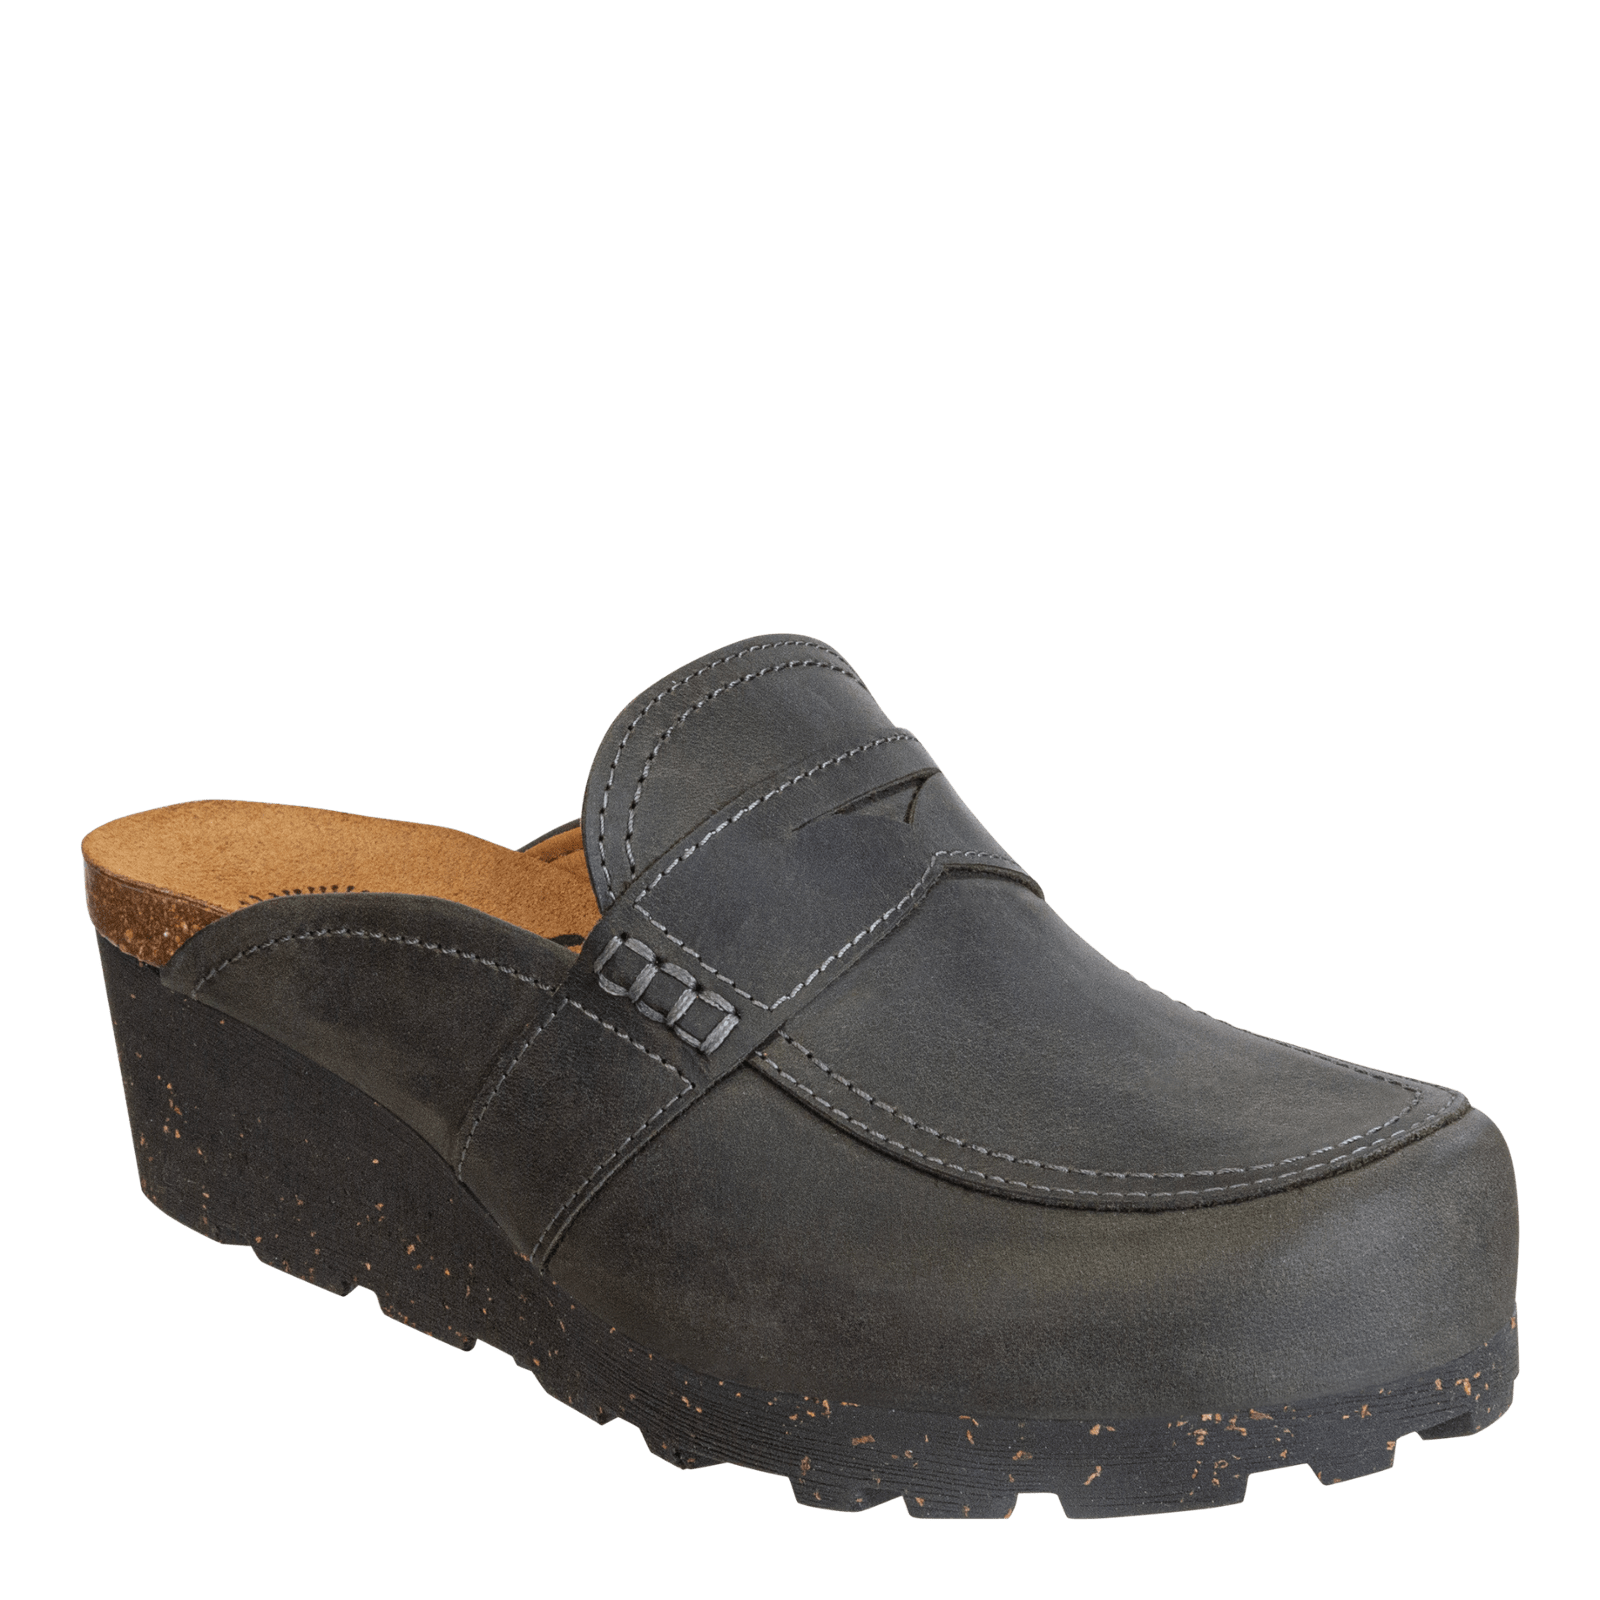 HOMAGE in CHARCOAL Wedge Clogs